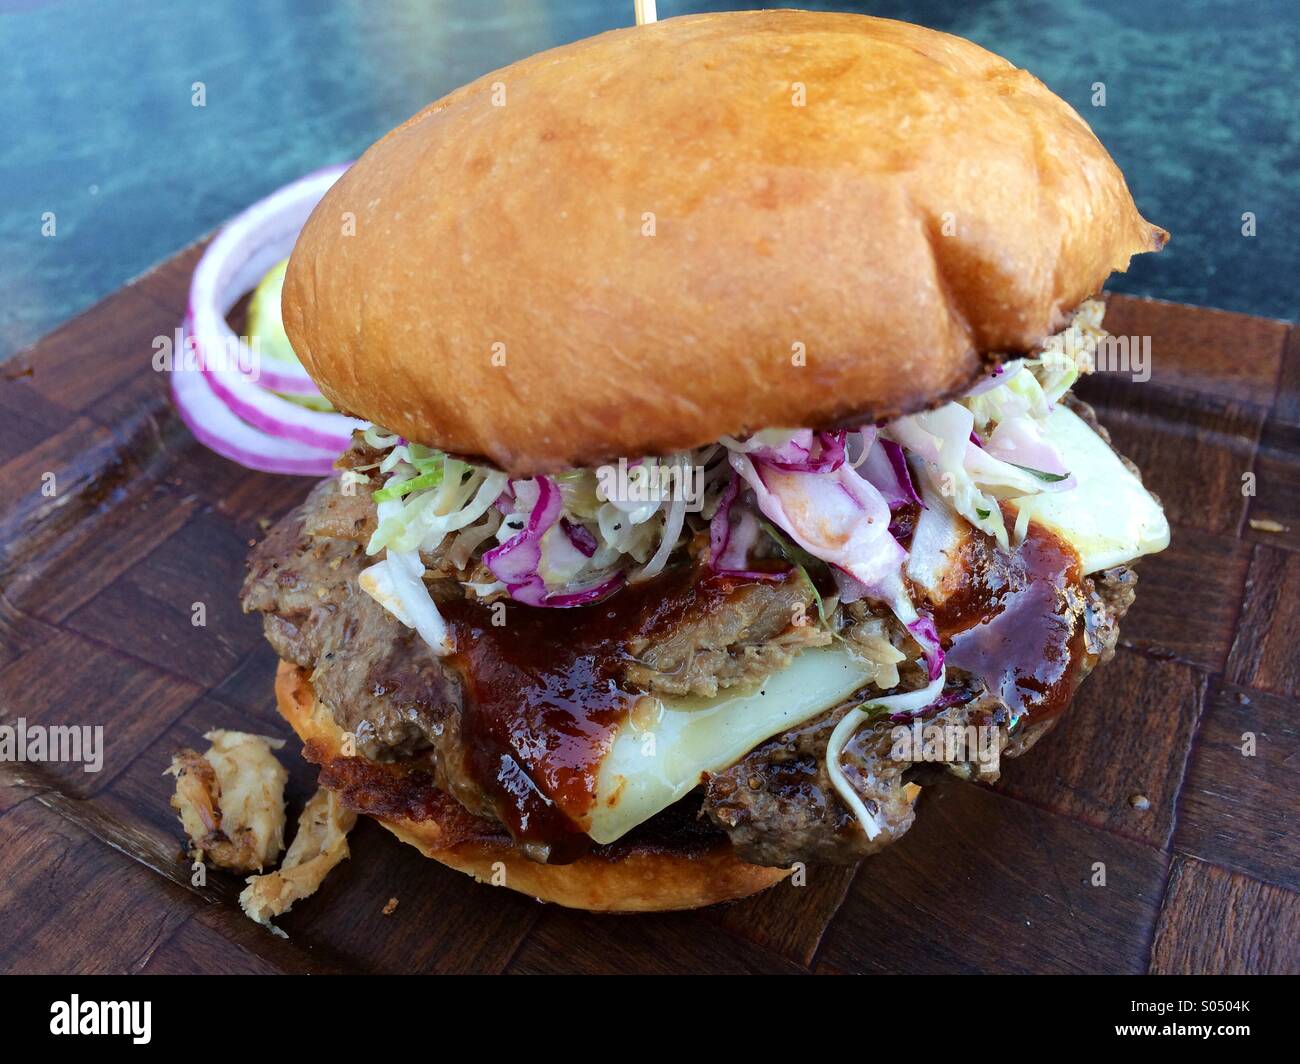 BBQ white cheddar burger with pulled pork, cabbage slaw, & crispy potatoes Stock Photo